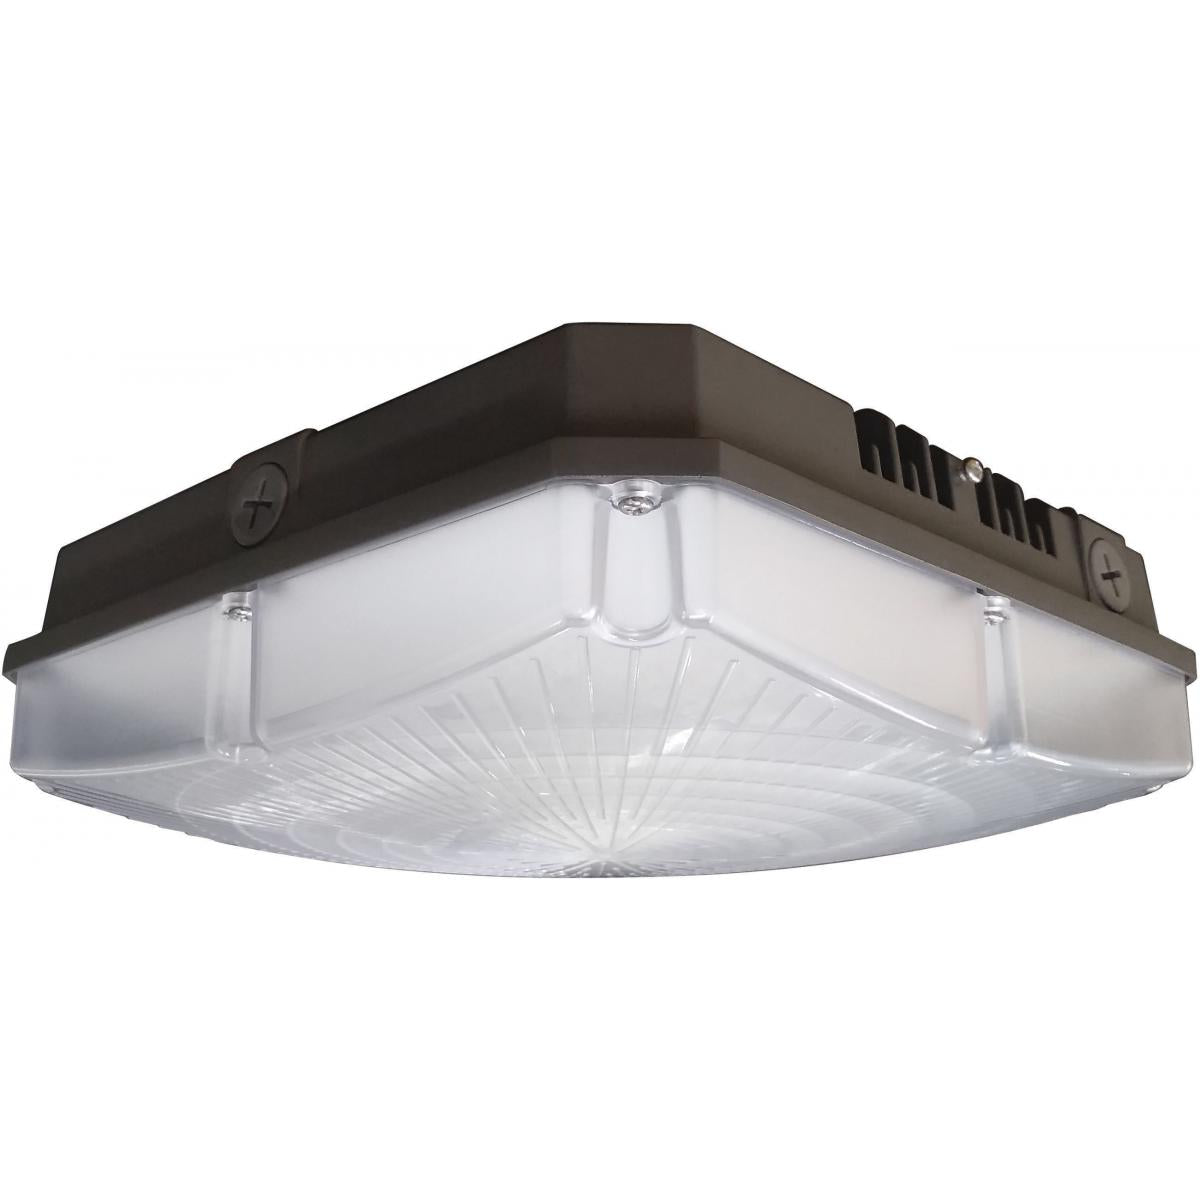 Light Fixture with Integrated LED Light Source